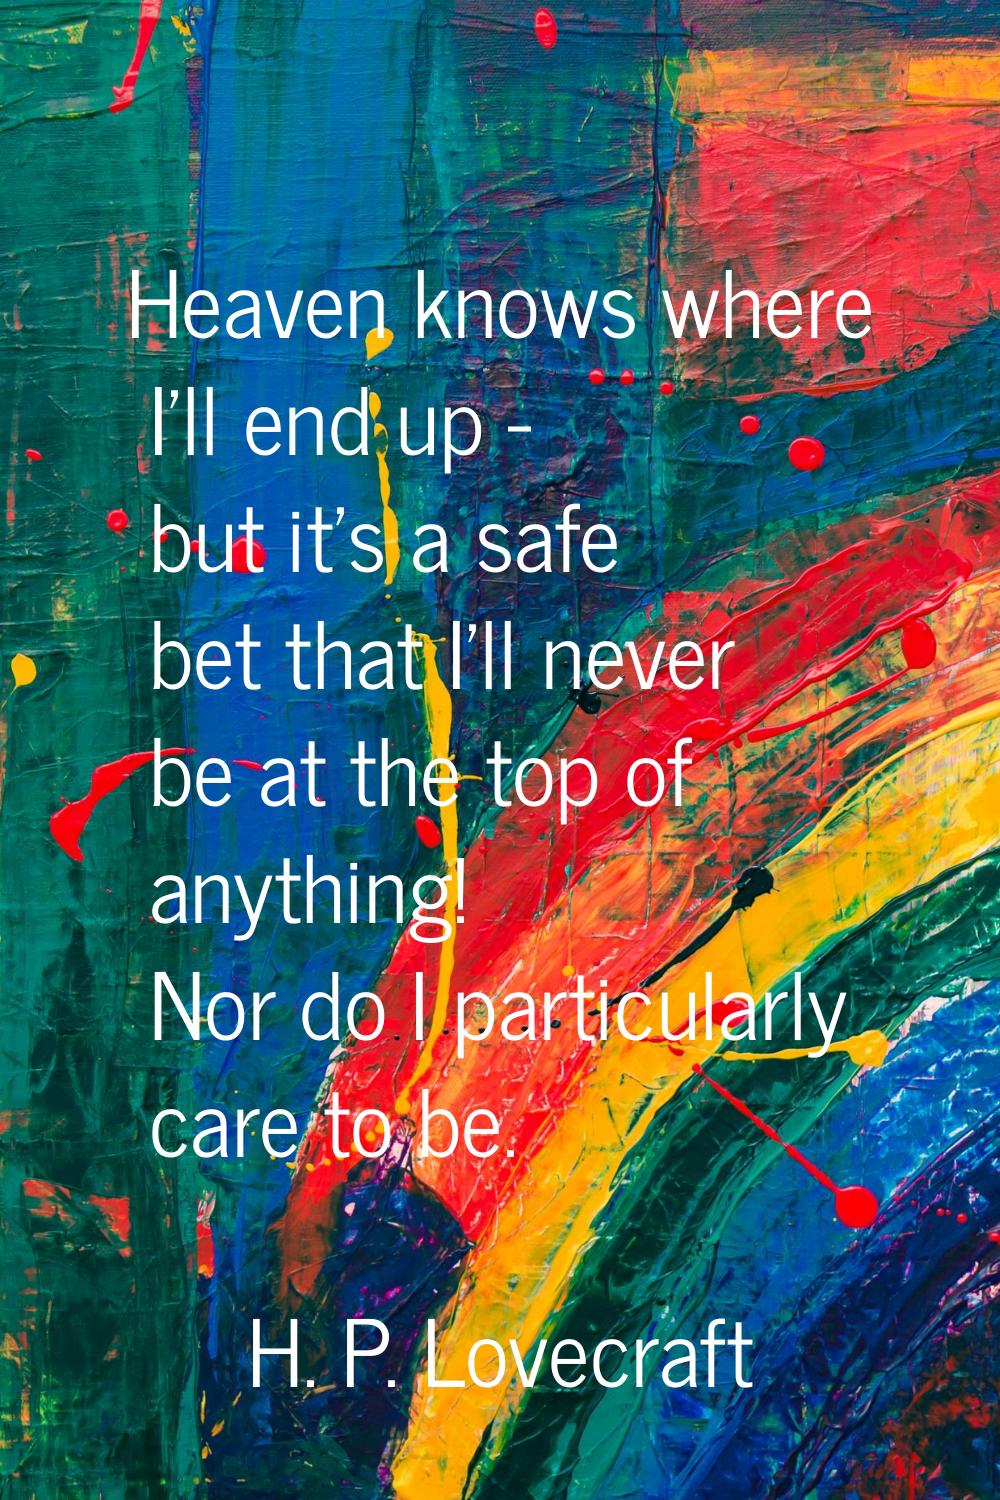 Heaven knows where I'll end up - but it's a safe bet that I'll never be at the top of anything! Nor